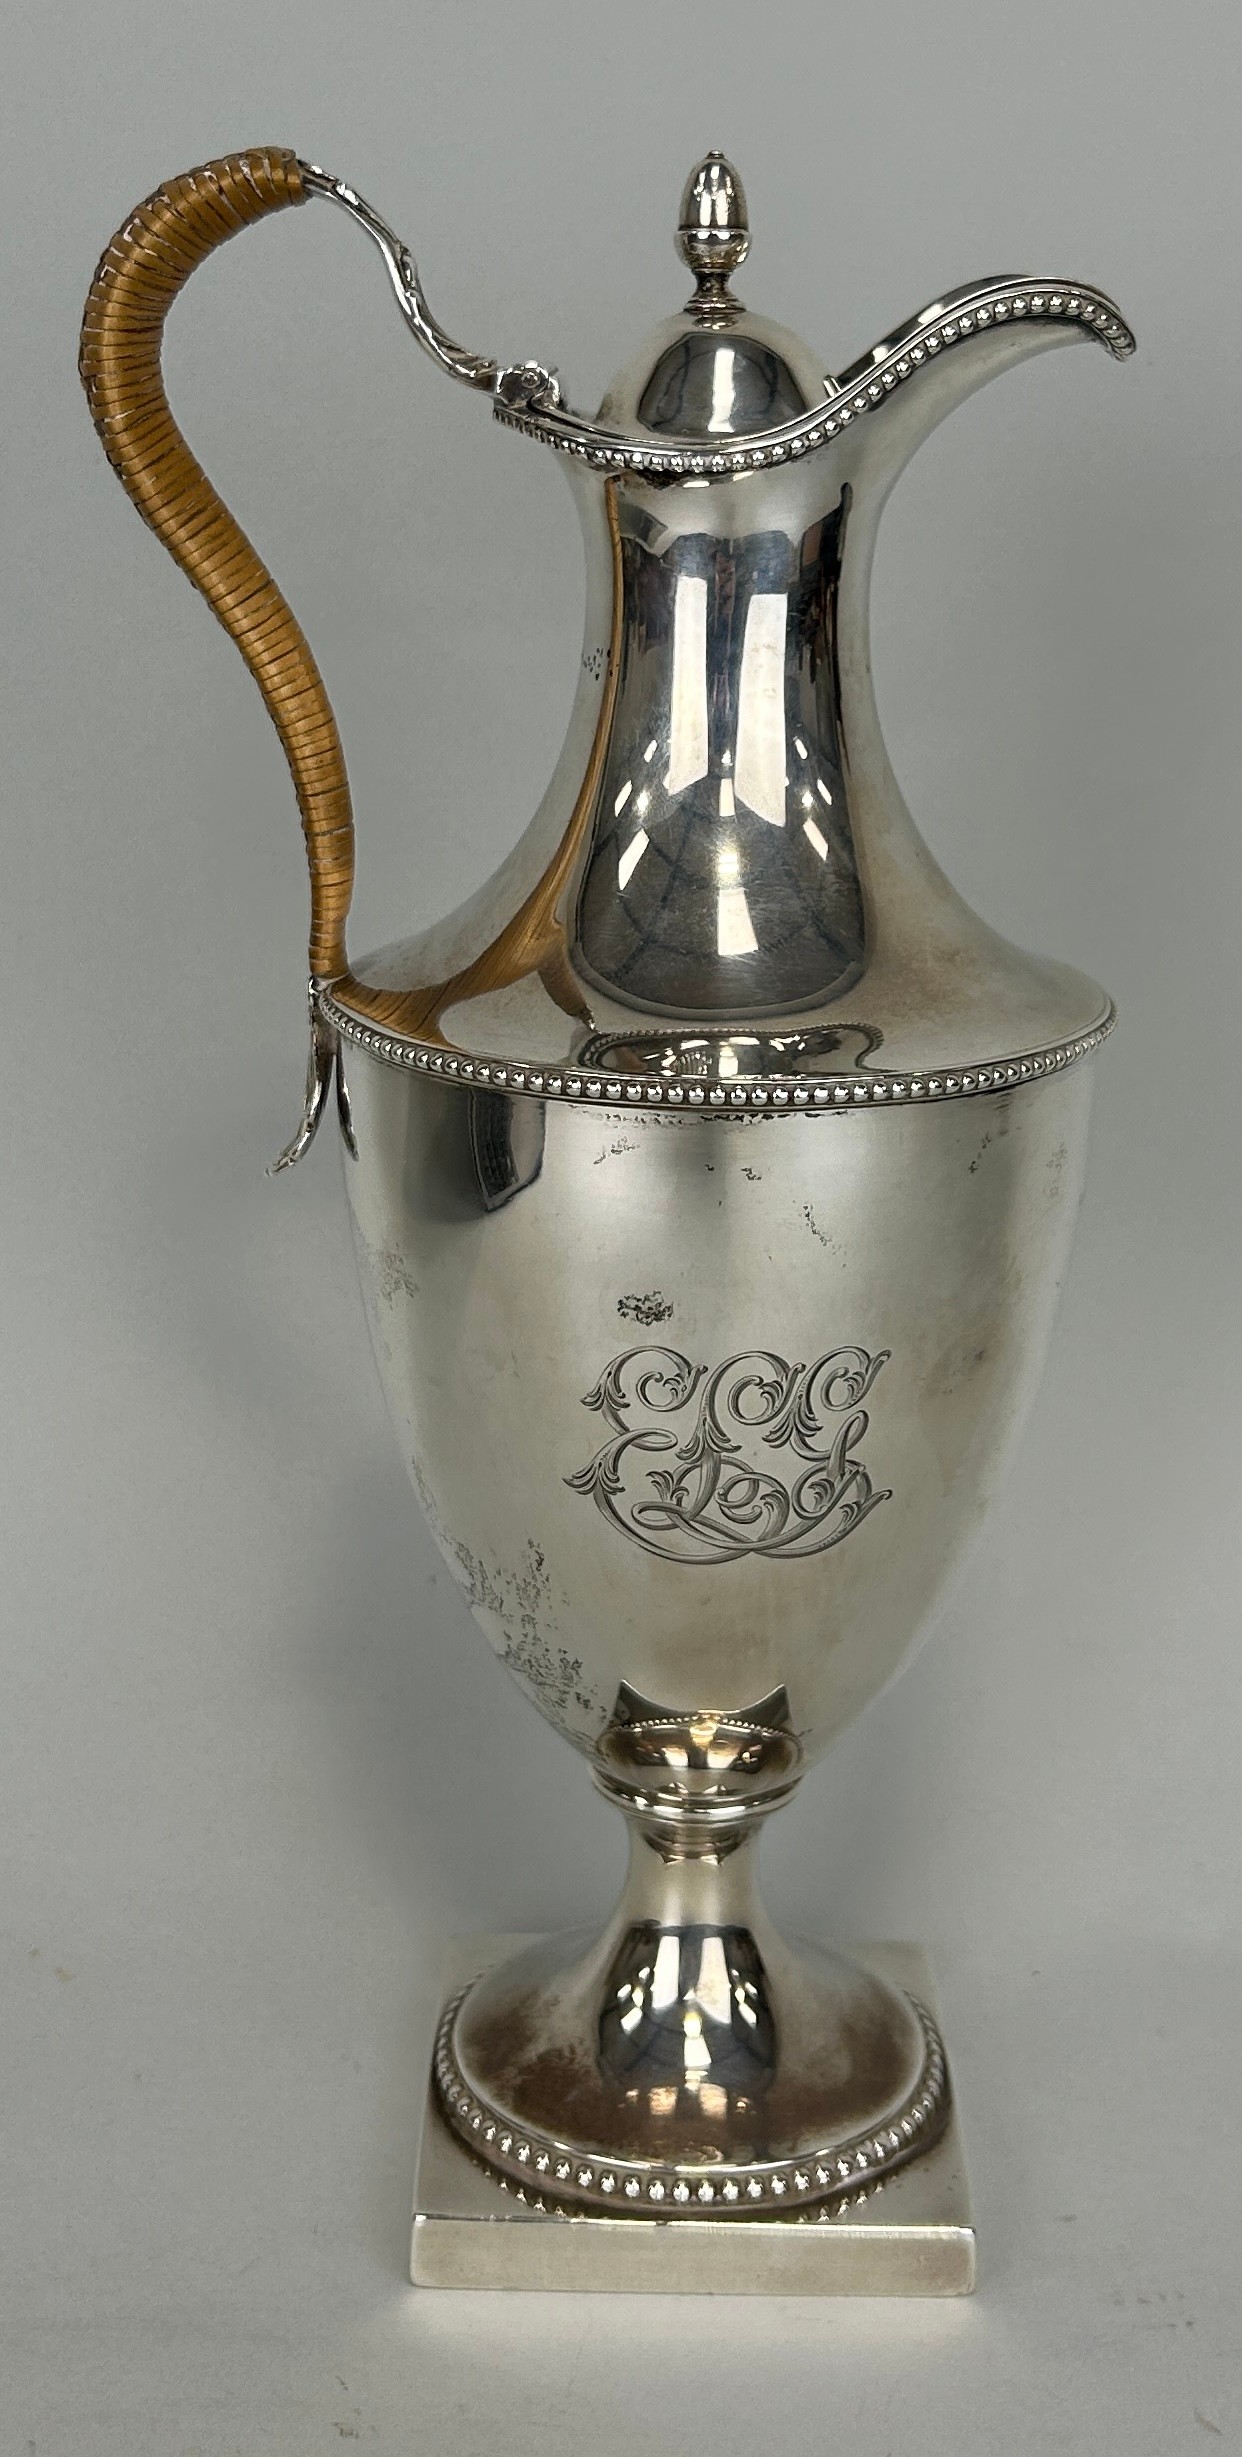 A GEORGE III SILVER COFFEE POT CIRCA 1776-78 WITH MARKS FOR ROBERT MAKEPEACE AND RICHARD CARTER,